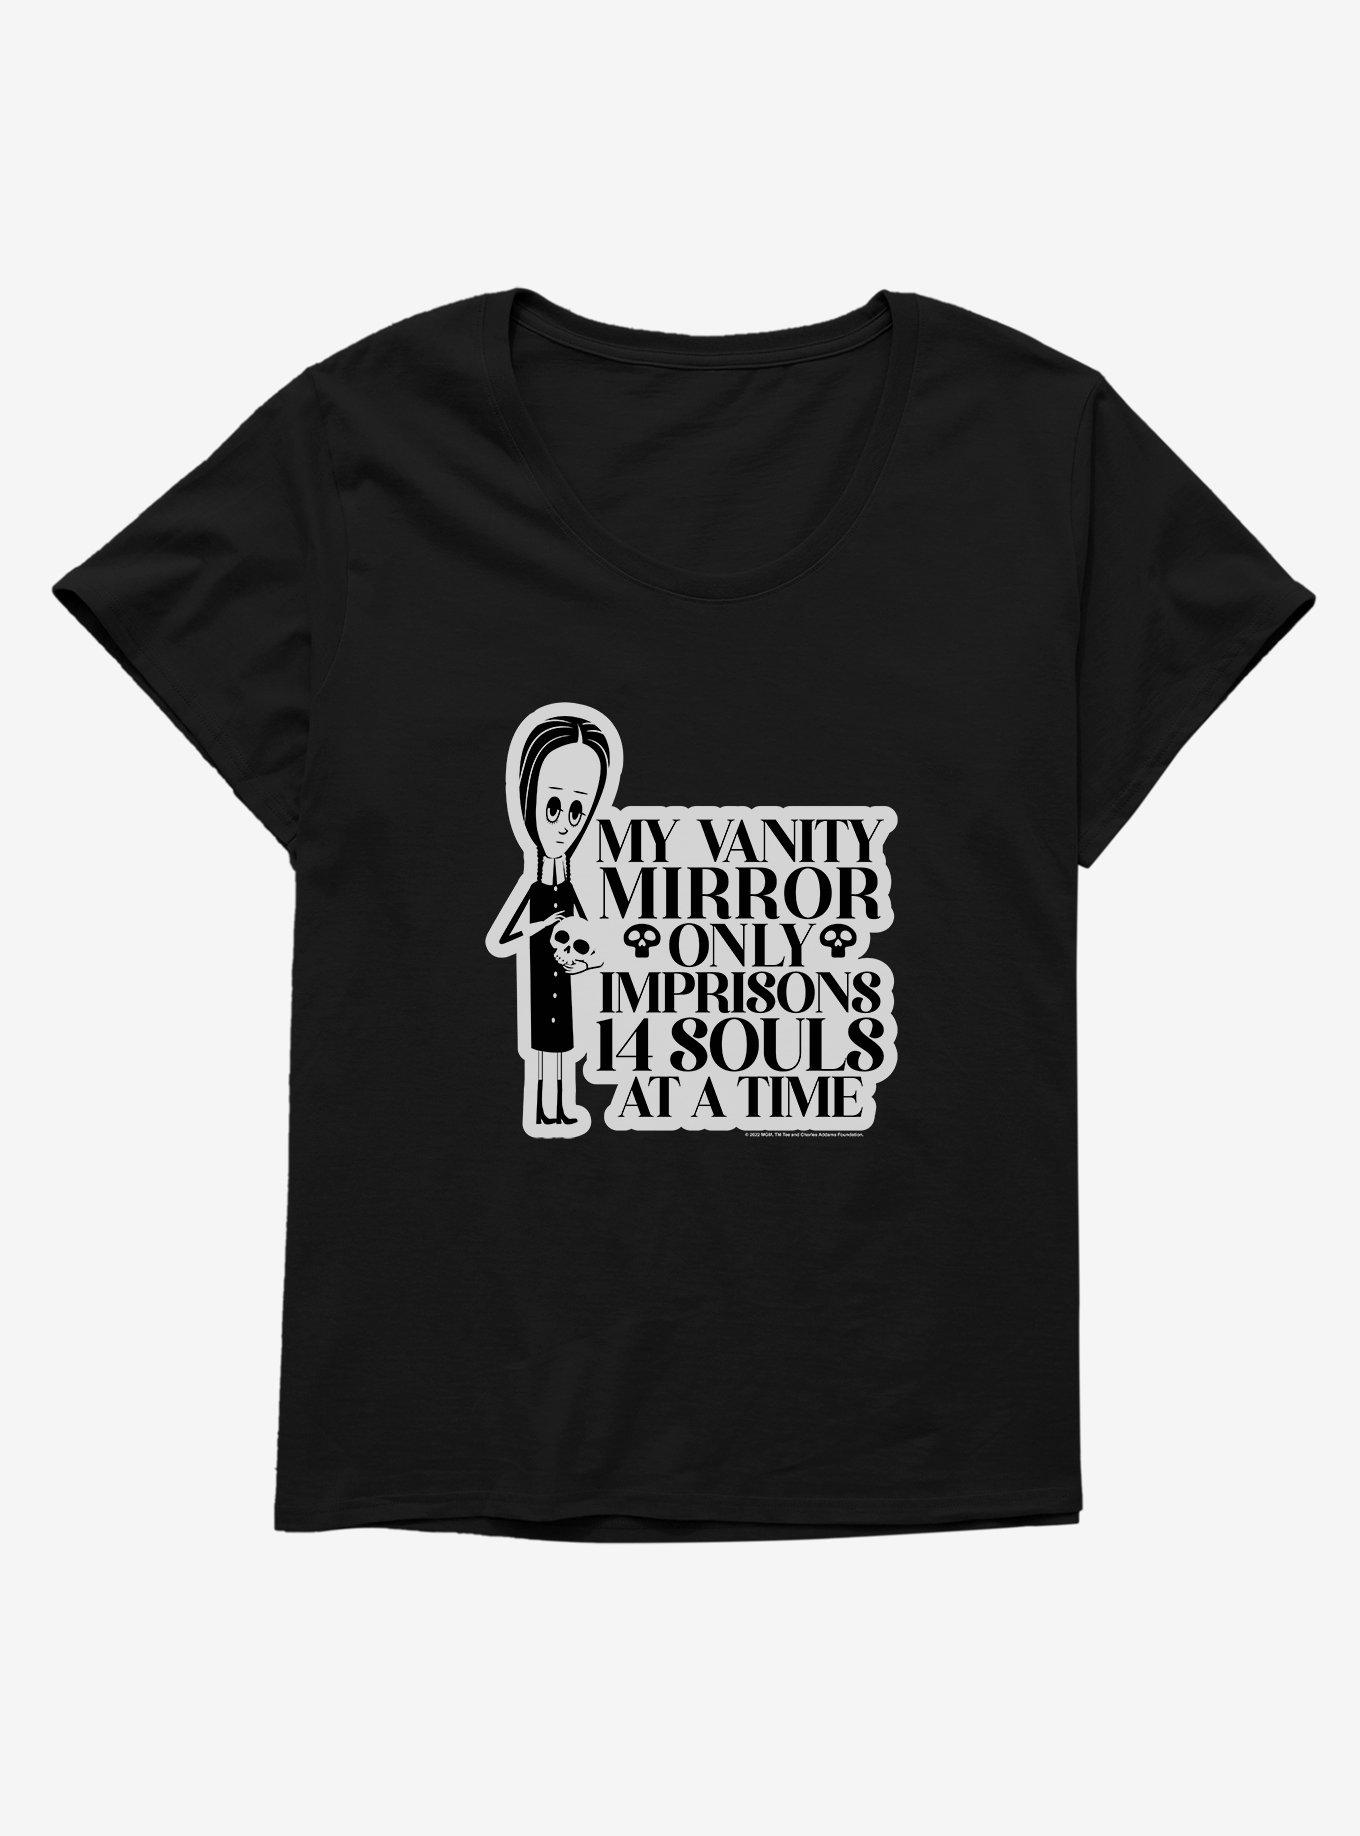 Addams Family Movie 14 Souls At A Time Girls T-Shirt Plus Size, BLACK, hi-res